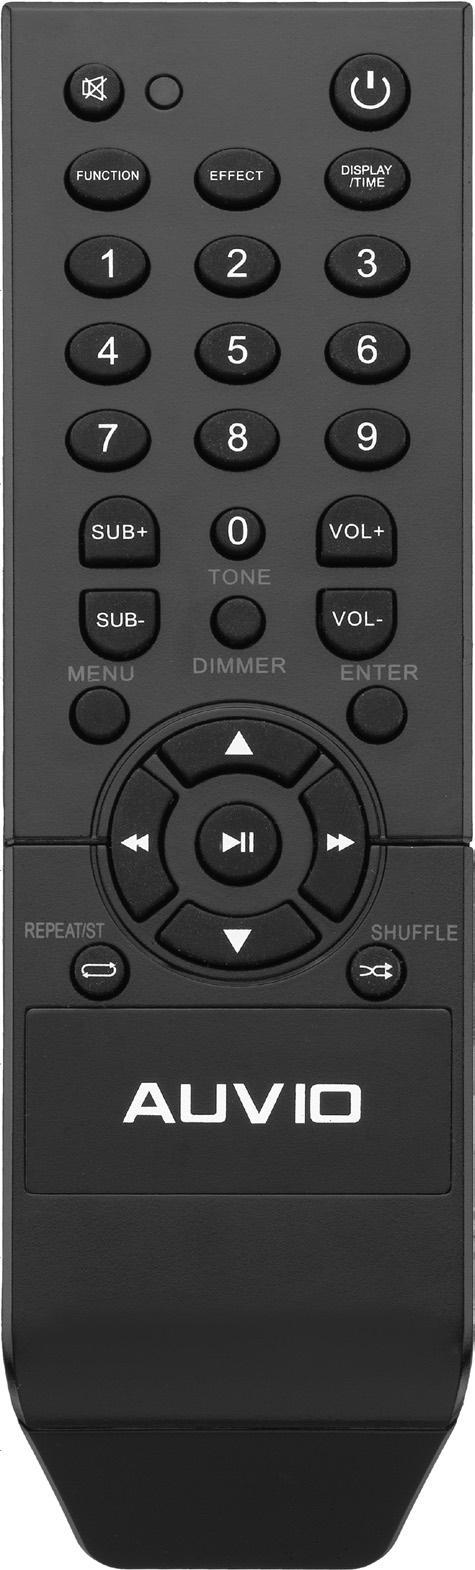 d Remote Control MUTE Turn sound on or off EFFECT Turn 3D virtual surround effect on or off Overview POWER Turn the soundbar on or off.